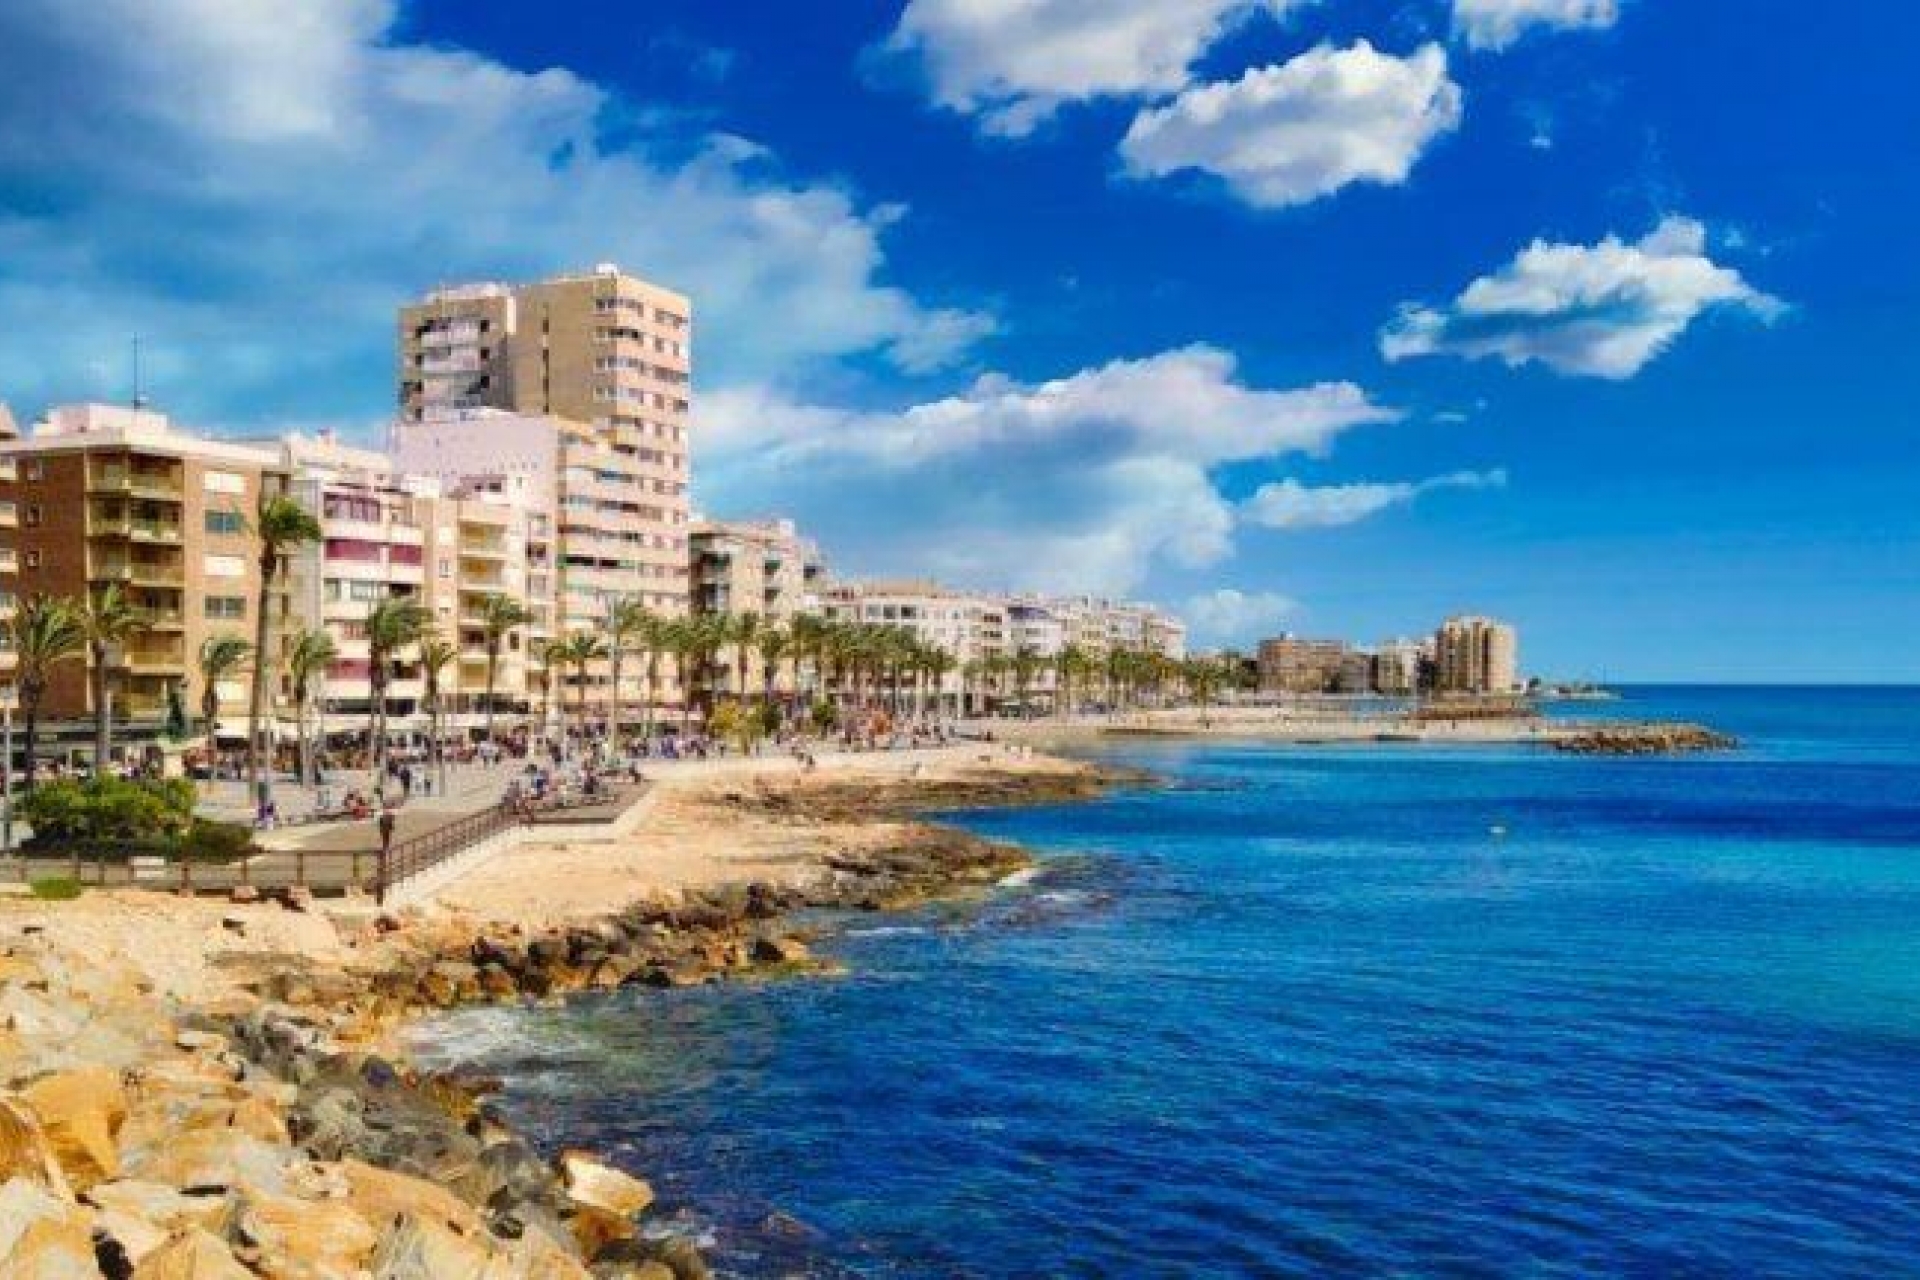 New Property for sale - Apartment for sale - Torrevieja - Torrevieja Town Centre